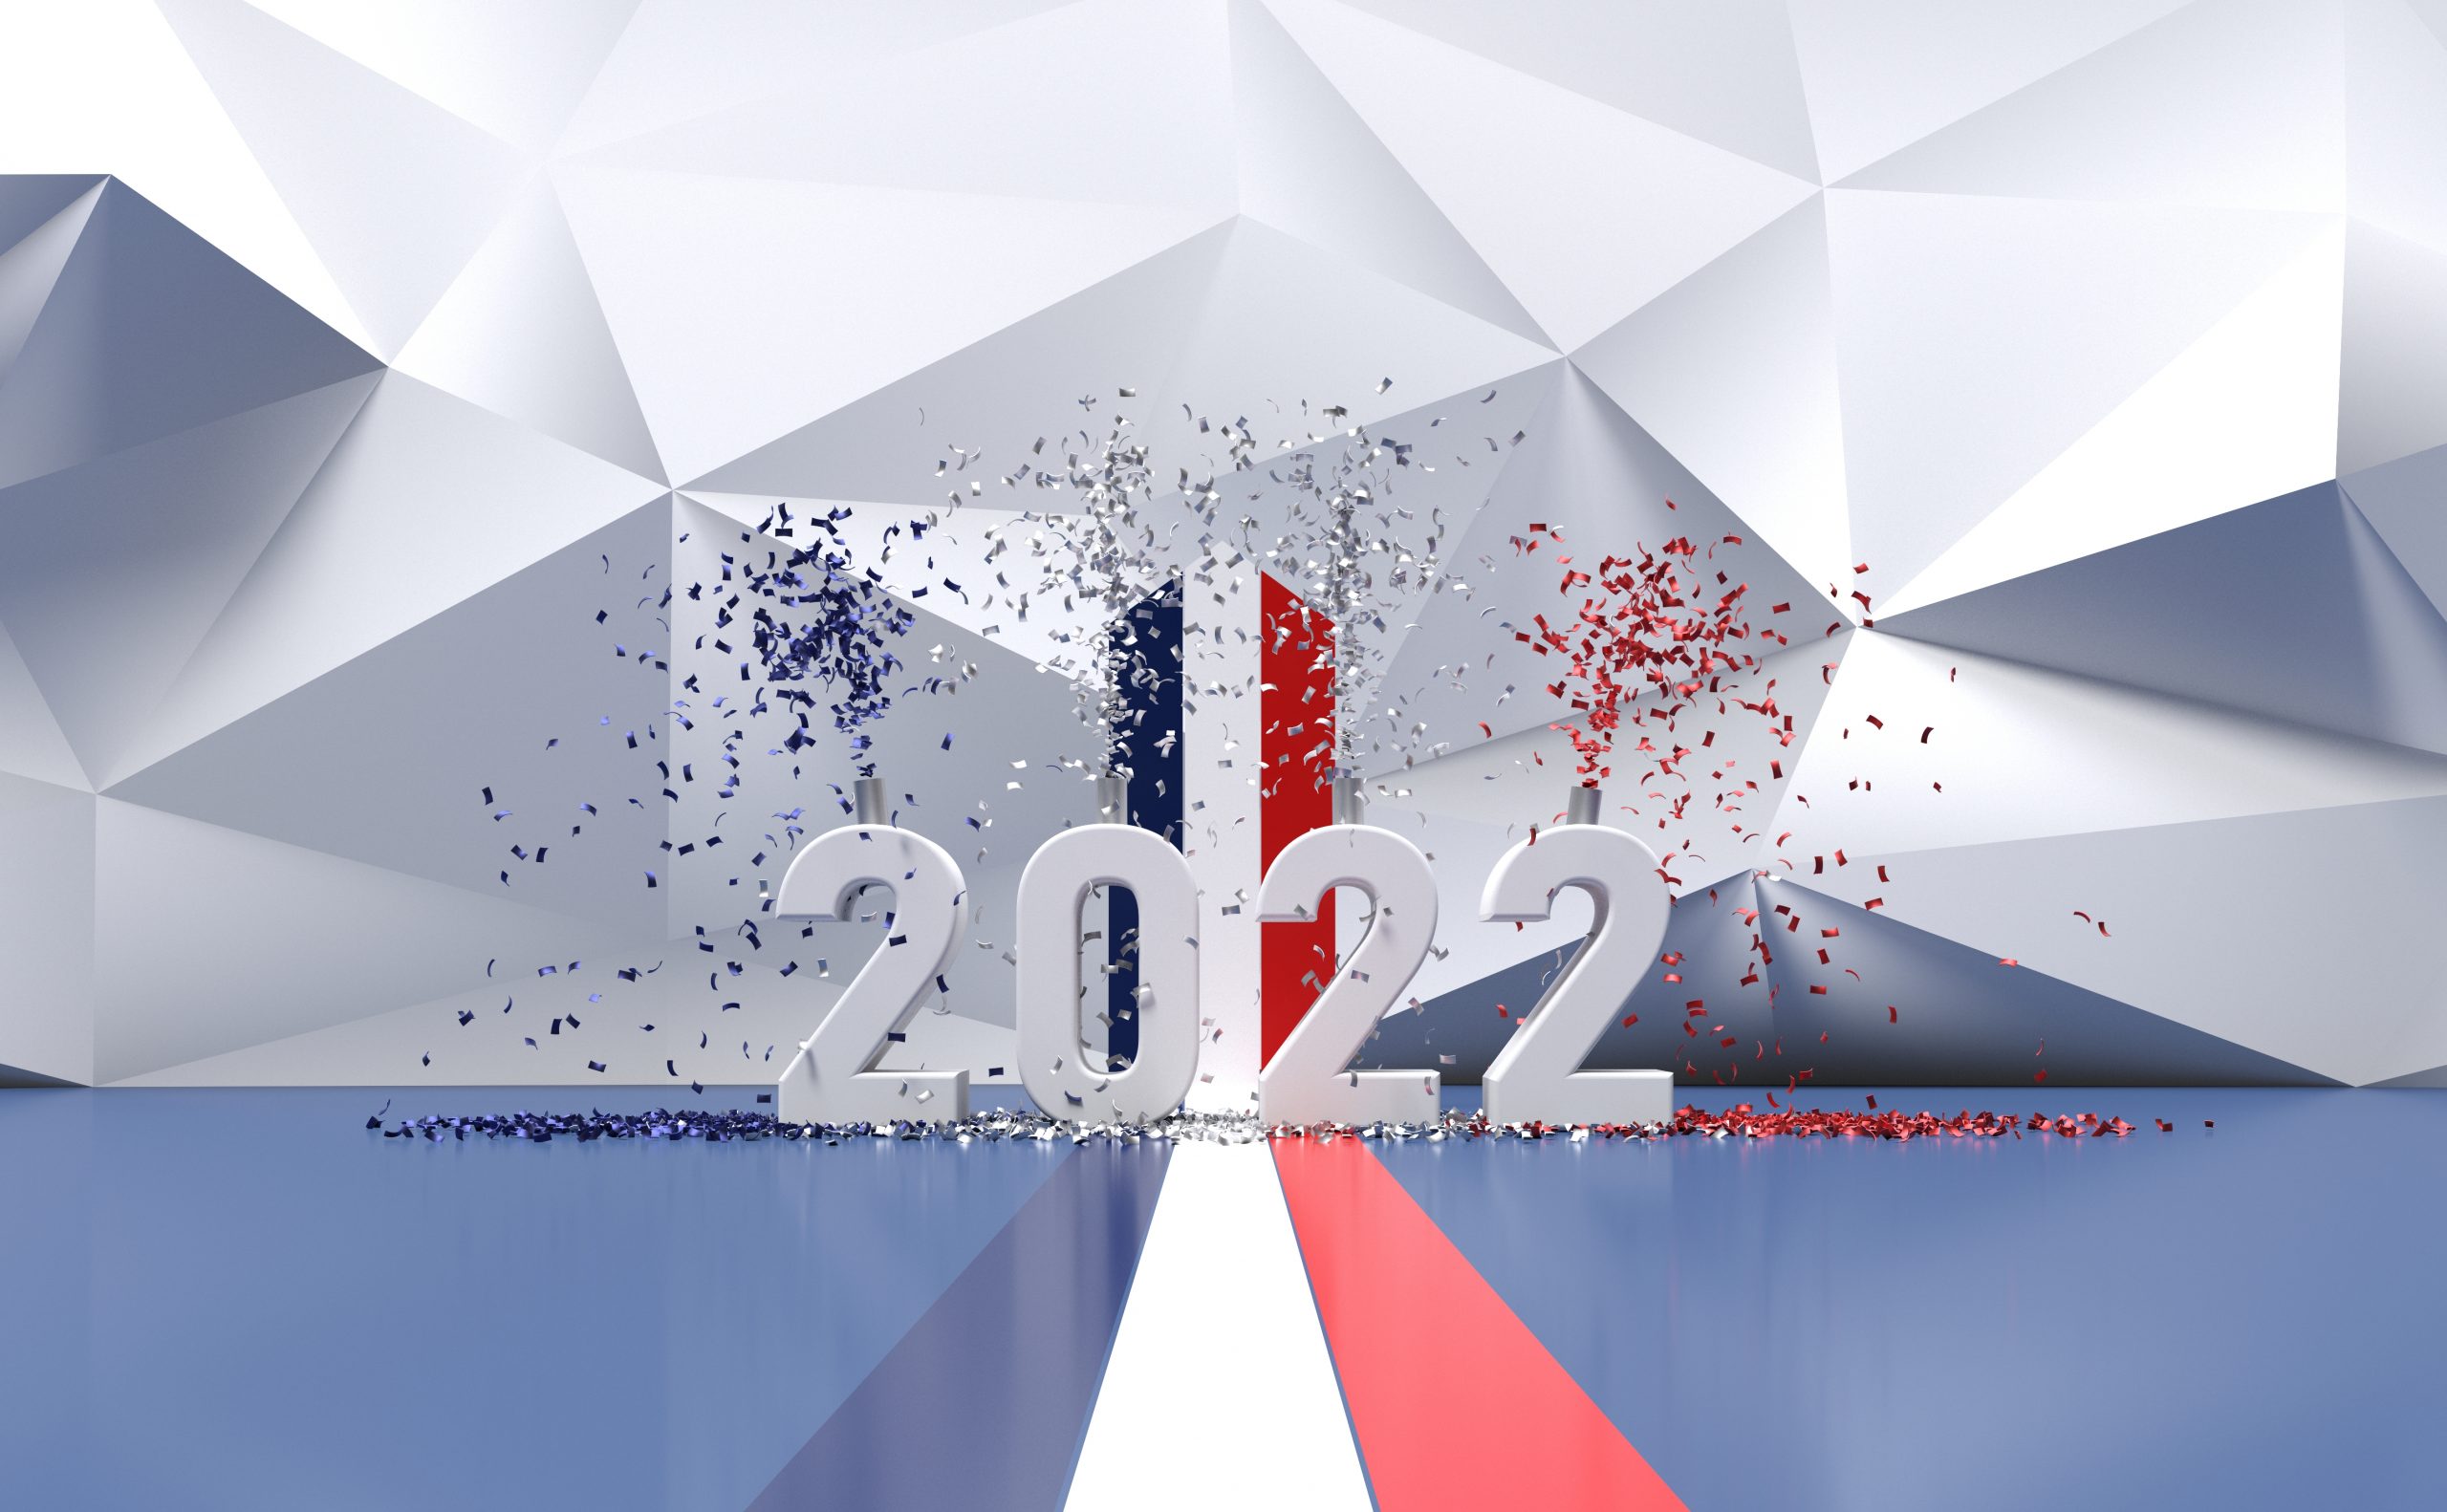 2022 french presidential election background - 3D rendering